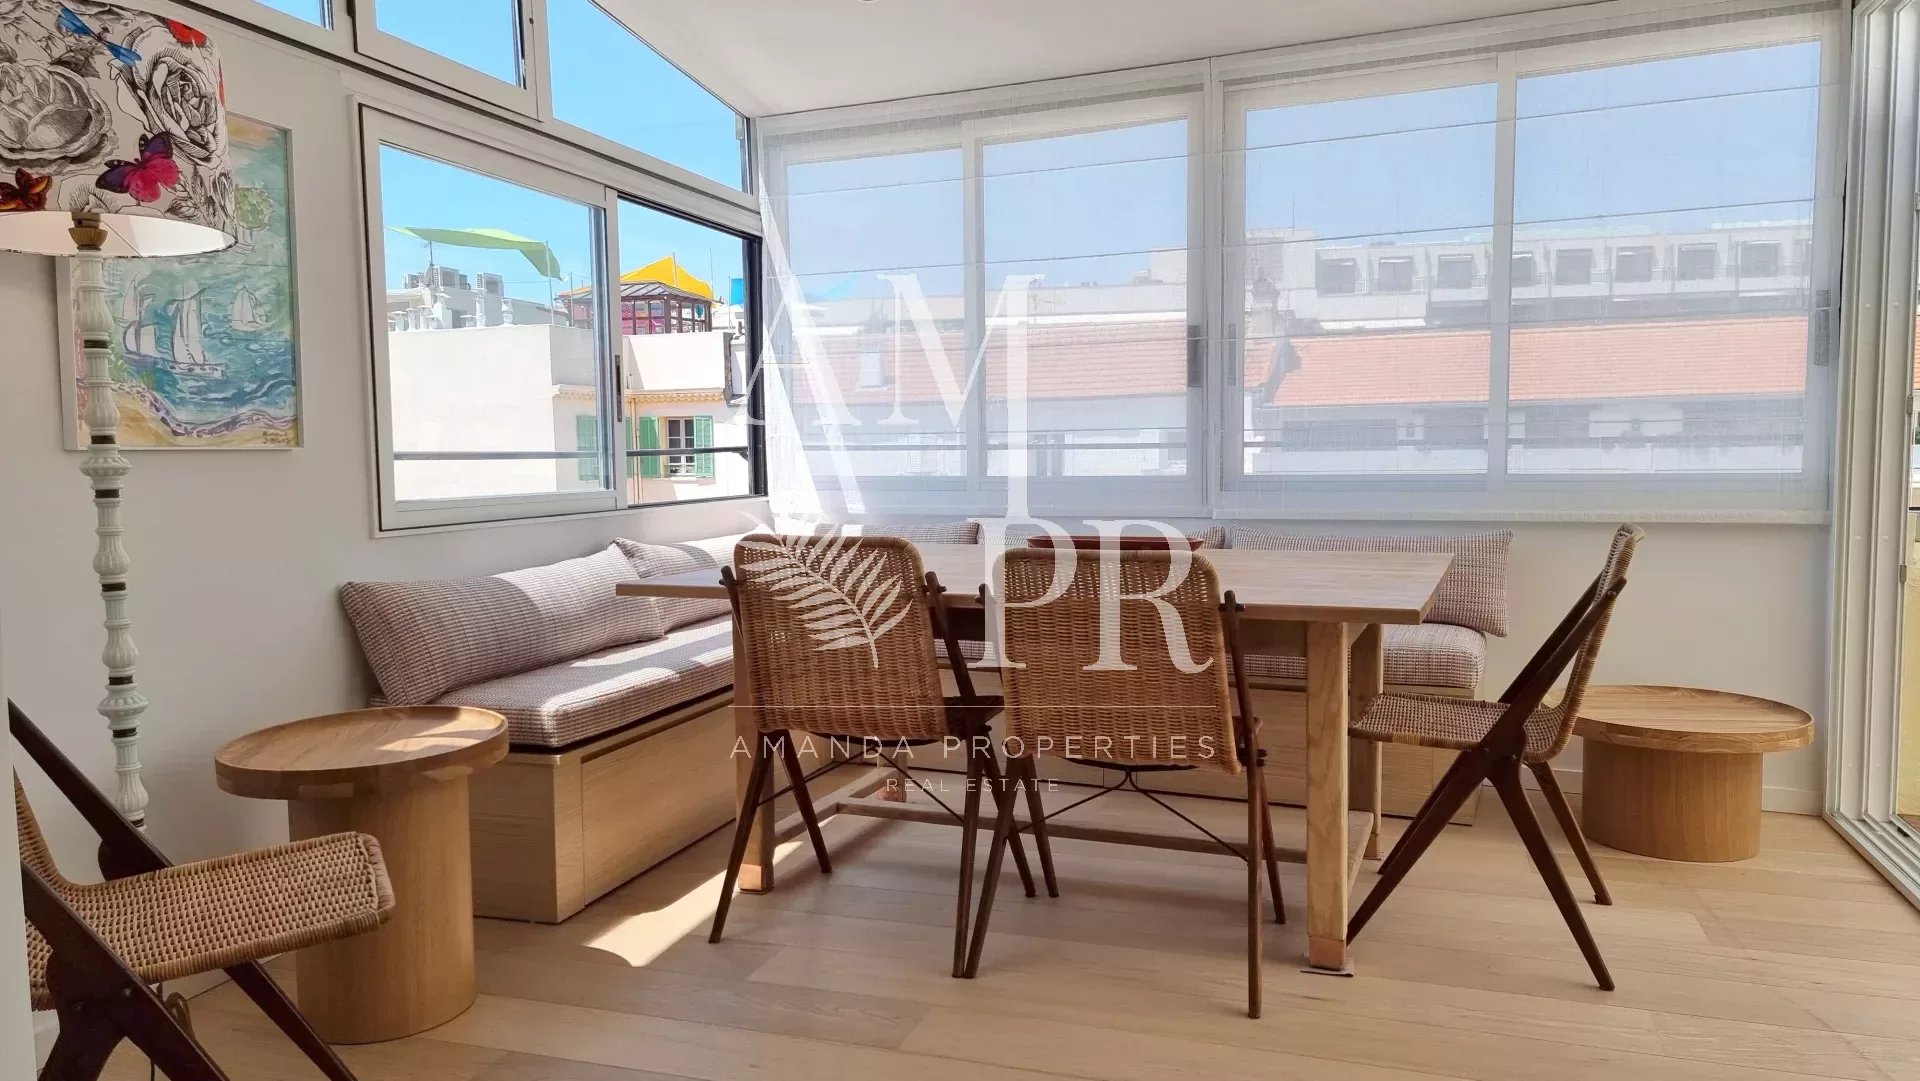 Magnificent 3 rooms apartment - City center - Sea view - Cannes